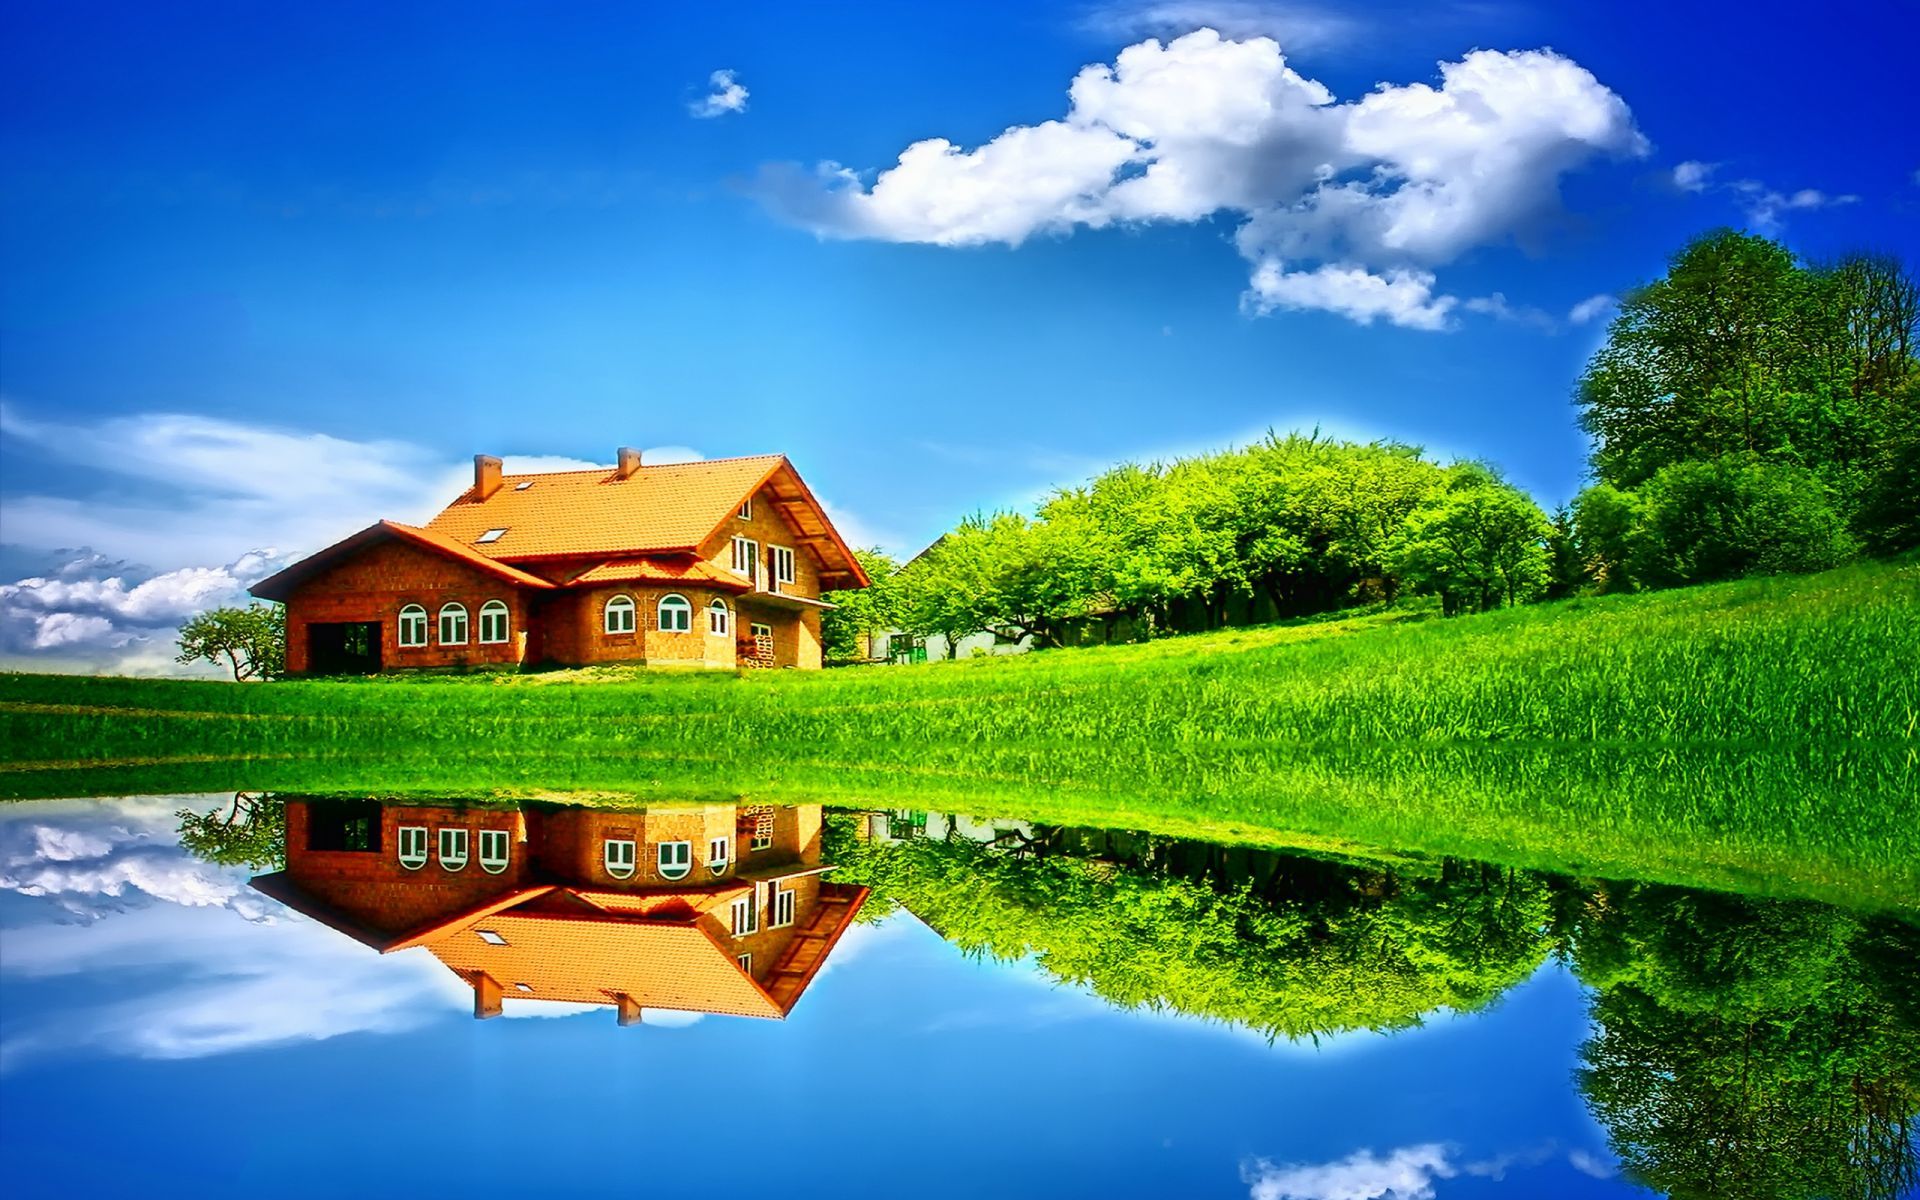 Small House. HD Nature Wallpaper for Mobile and Desktop